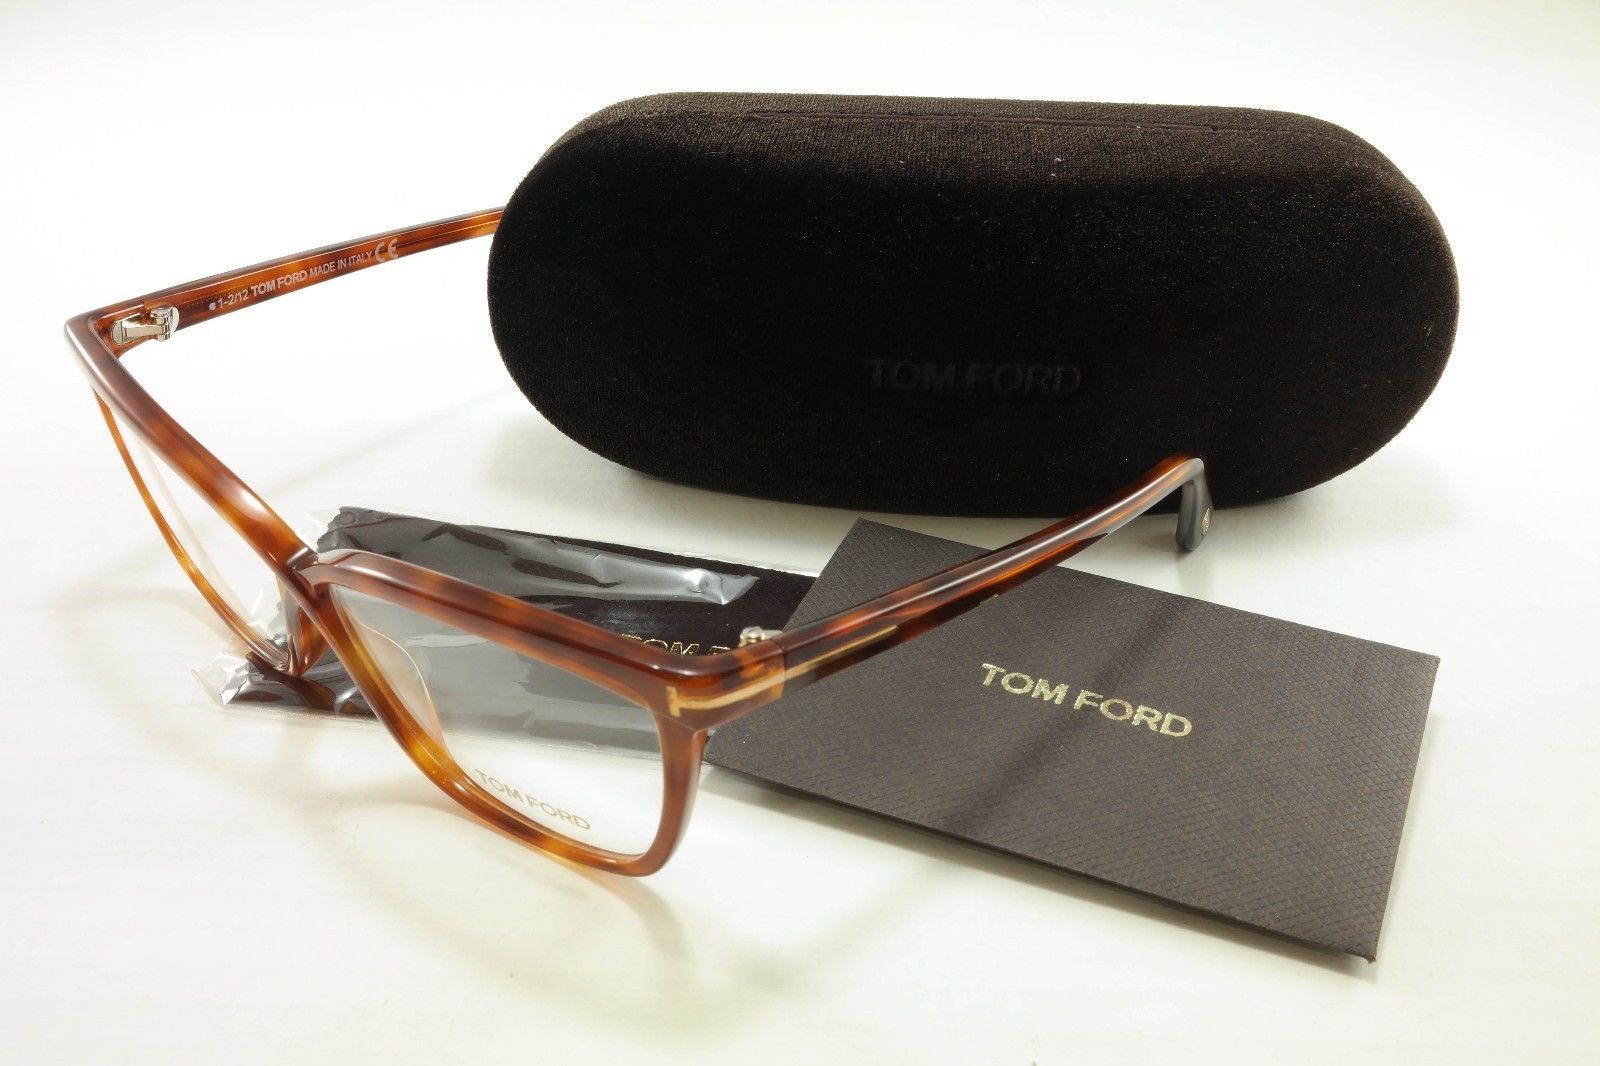 Primary image for Tom Ford Authentic Eyeglasses Frame TF5267 053 Light Havana Brown Italy Made